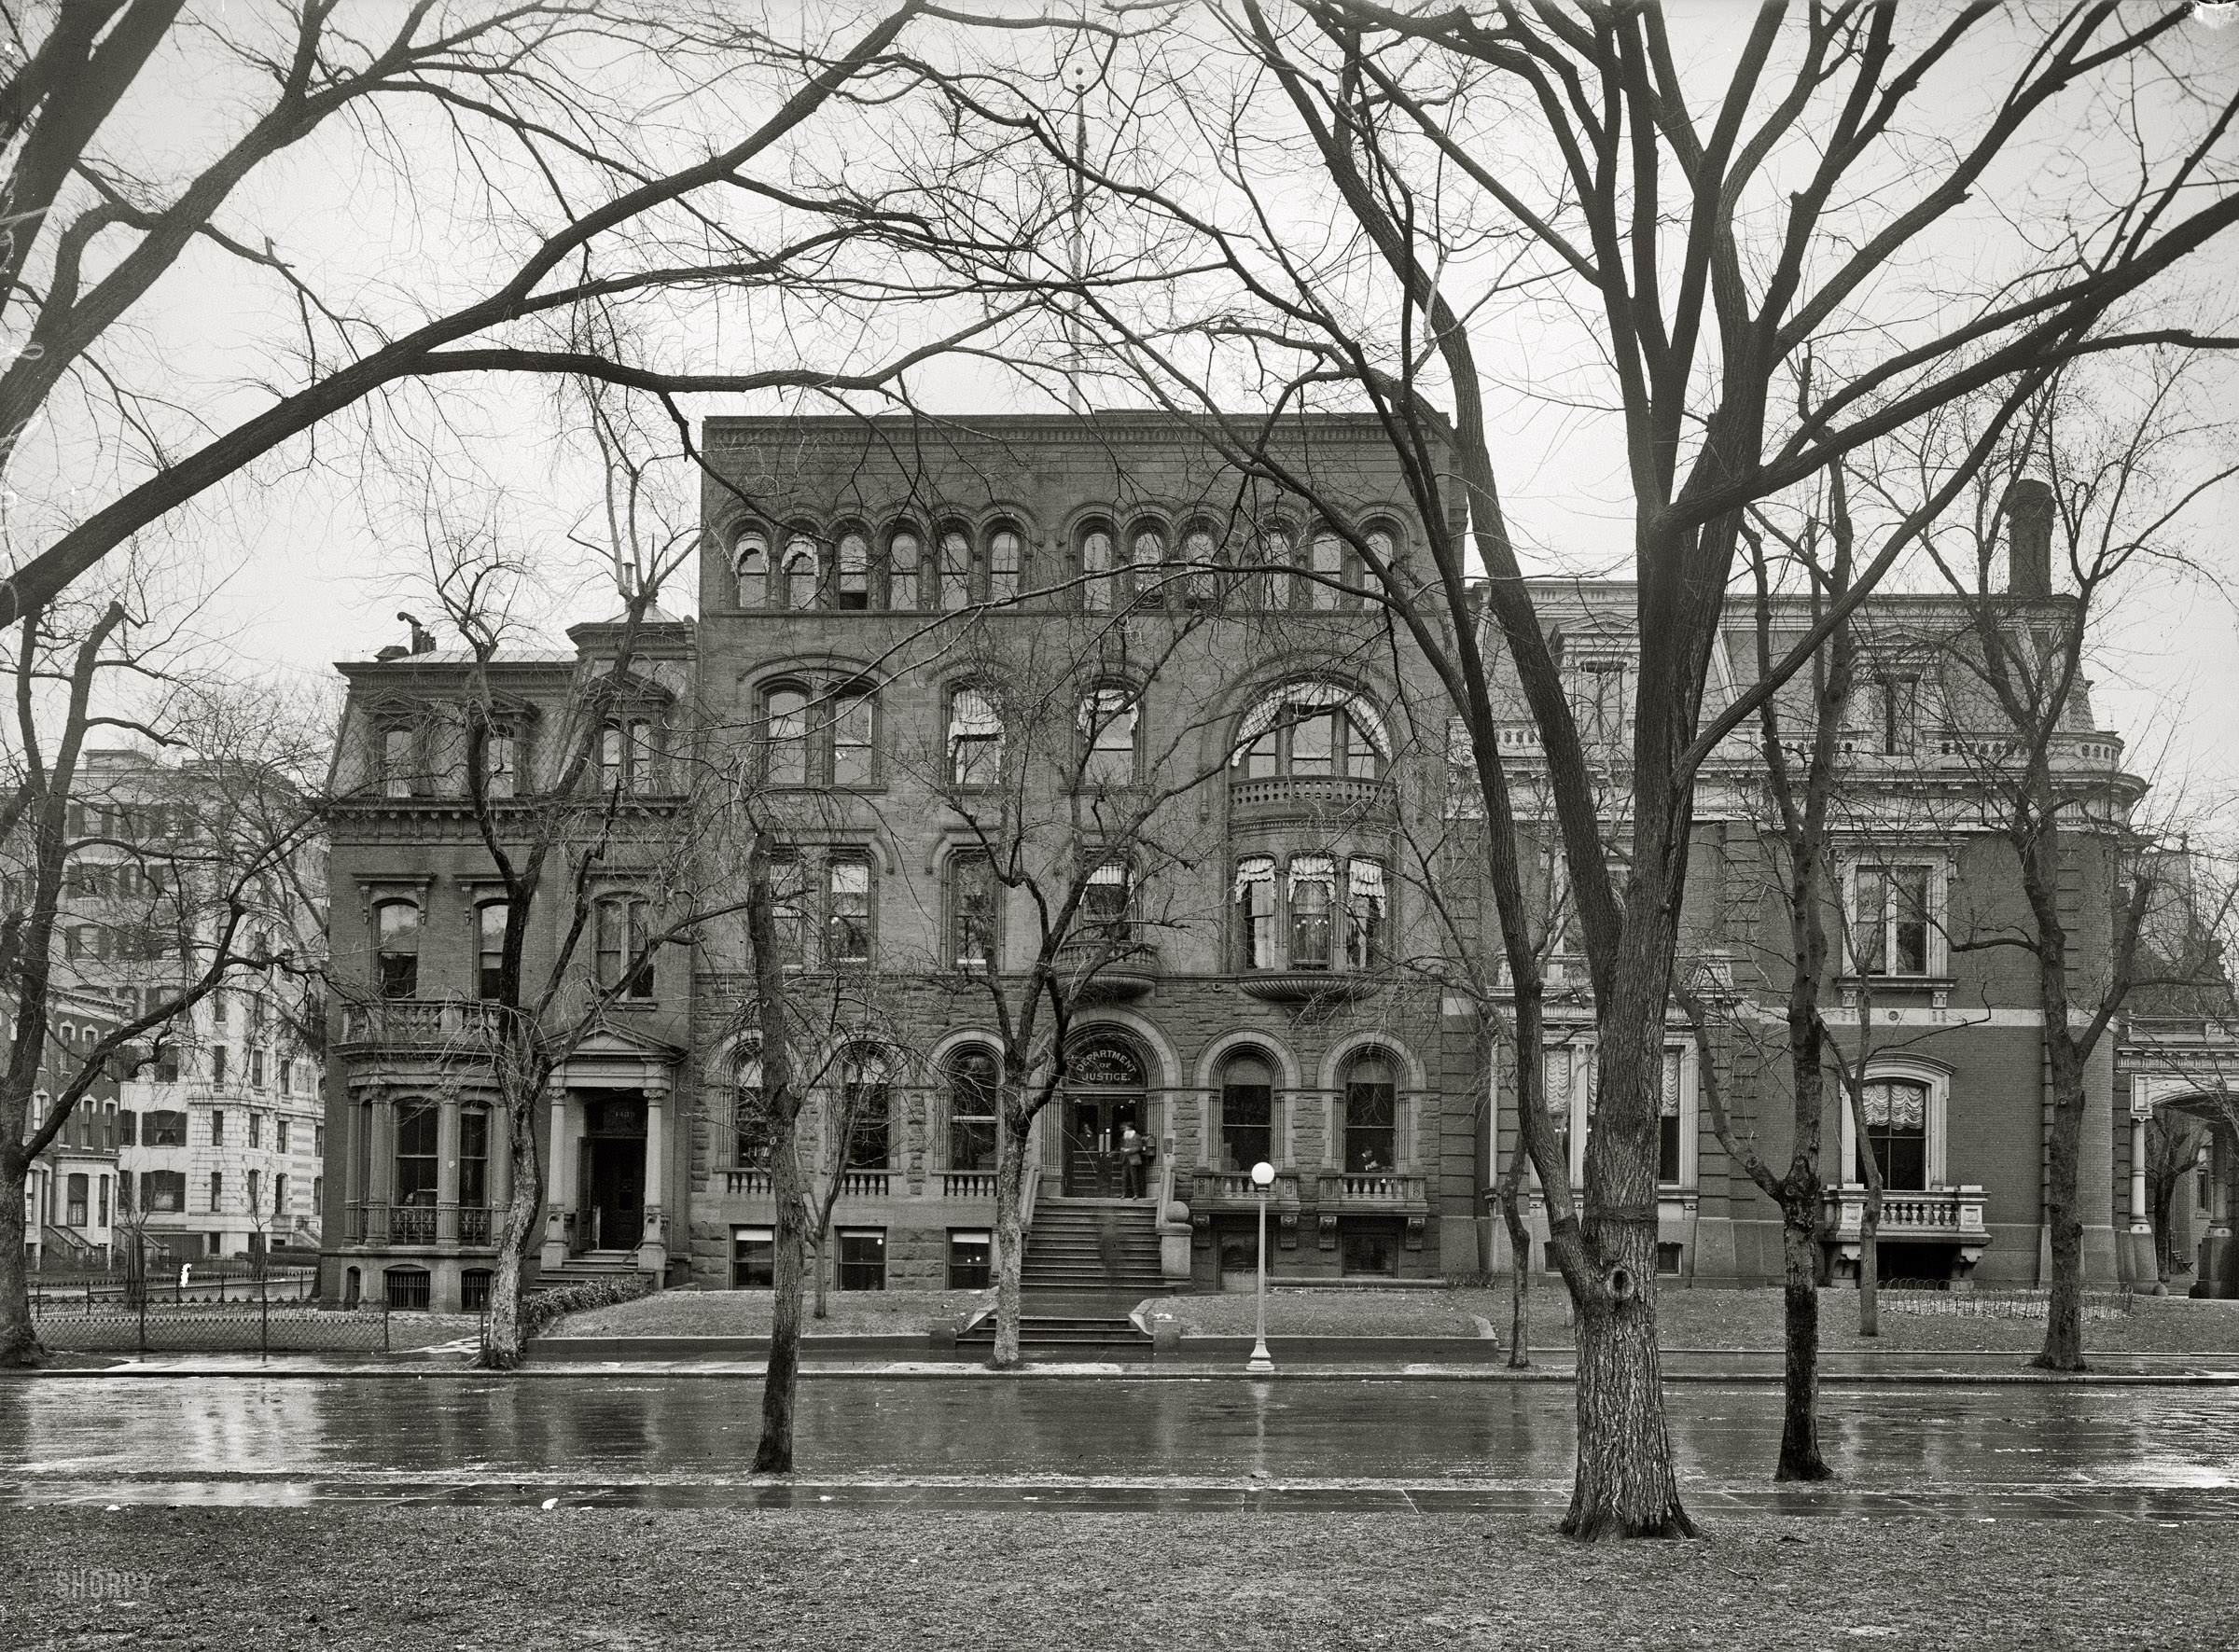 Washington, D.C., circa 1915. The Department of Justice building at 1435 K Street N.W. Harris & Ewing Collection glass negative. View full size.